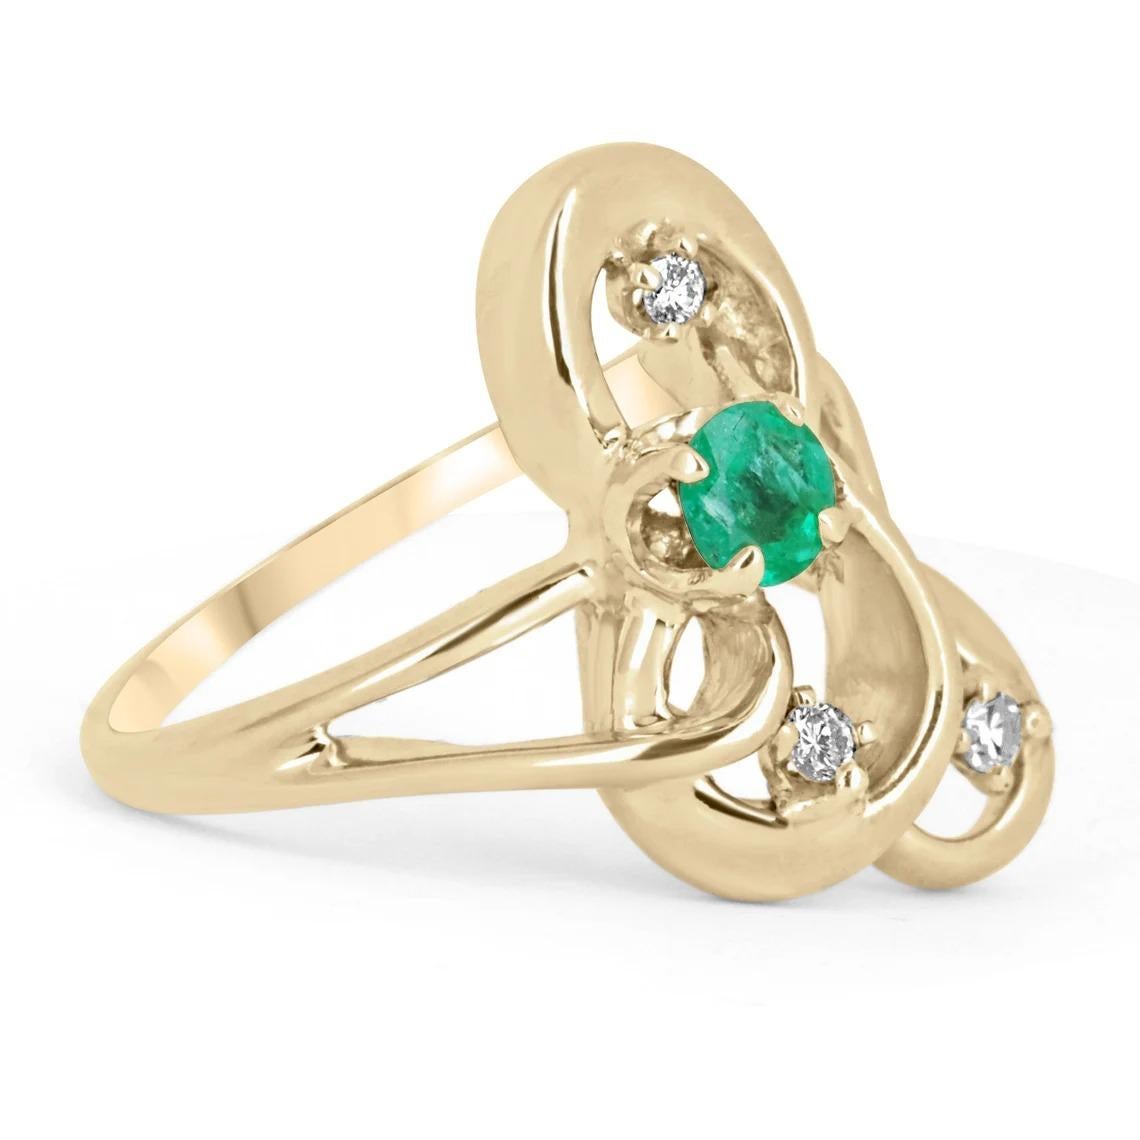 A vivid, medium green Colombian emerald and diamond antique ring. Created in everlasting, 14k yellow gold the fine emerald has incredible color and ideal eye clarity. The gem is set in a secure four-prong setting. This antique ring is fashionable